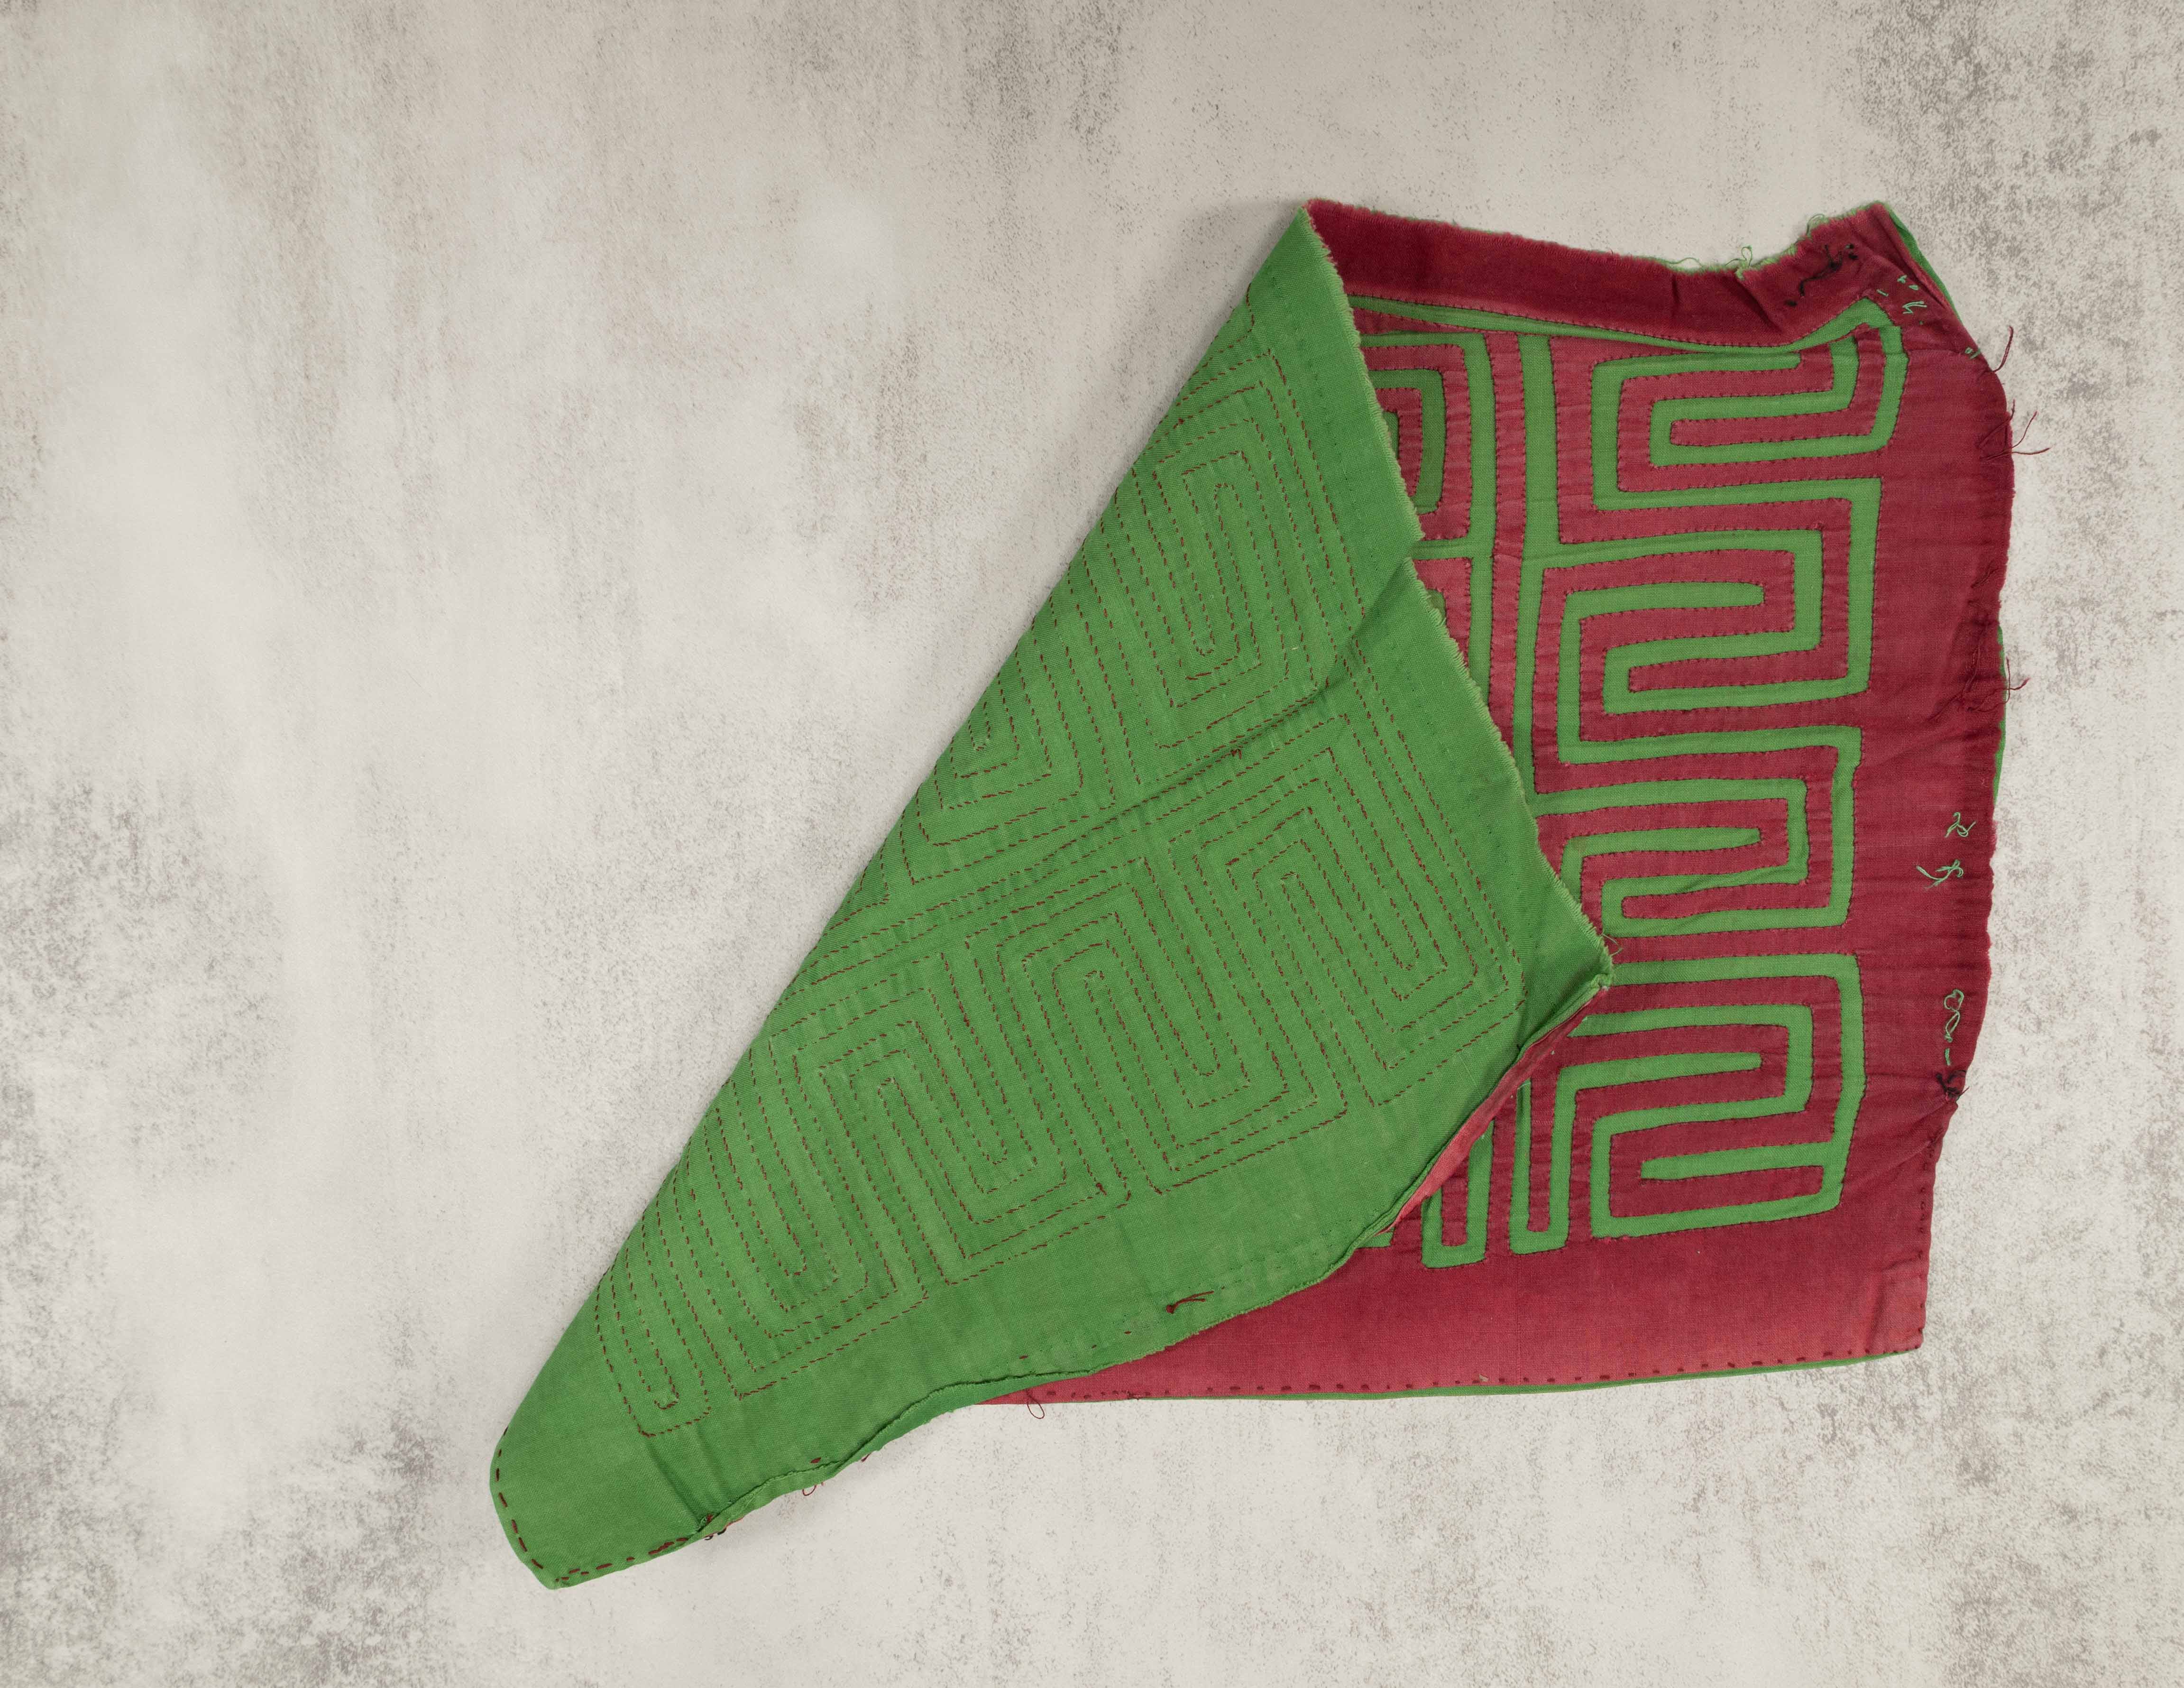 Vintage Green And Maroon Classic Design Mola